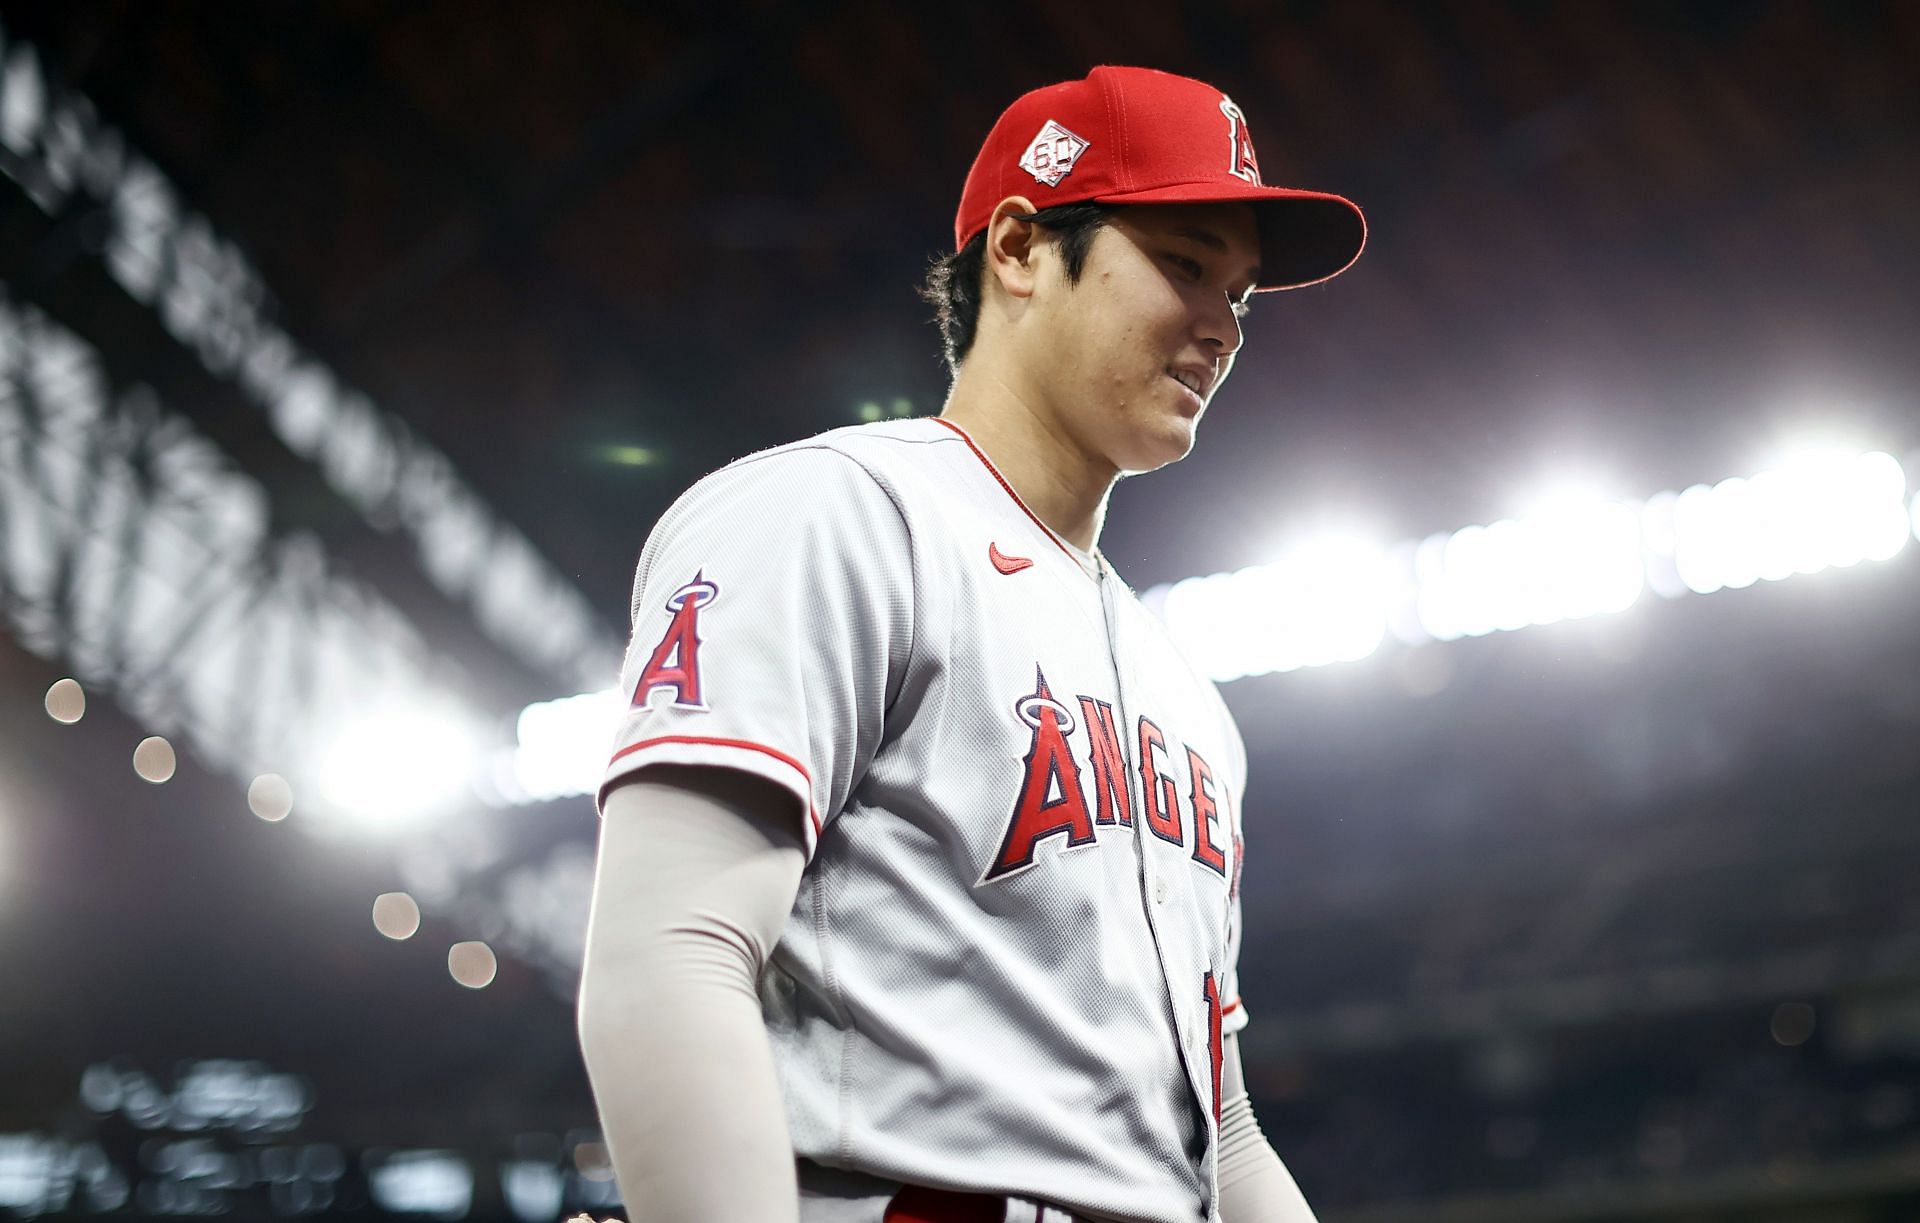 Shohei Ohtani, LA Angels golden boy believes he would have been only a  pitcher had he opted for US high schools, "Most of the teams valued me as a  pitcher"